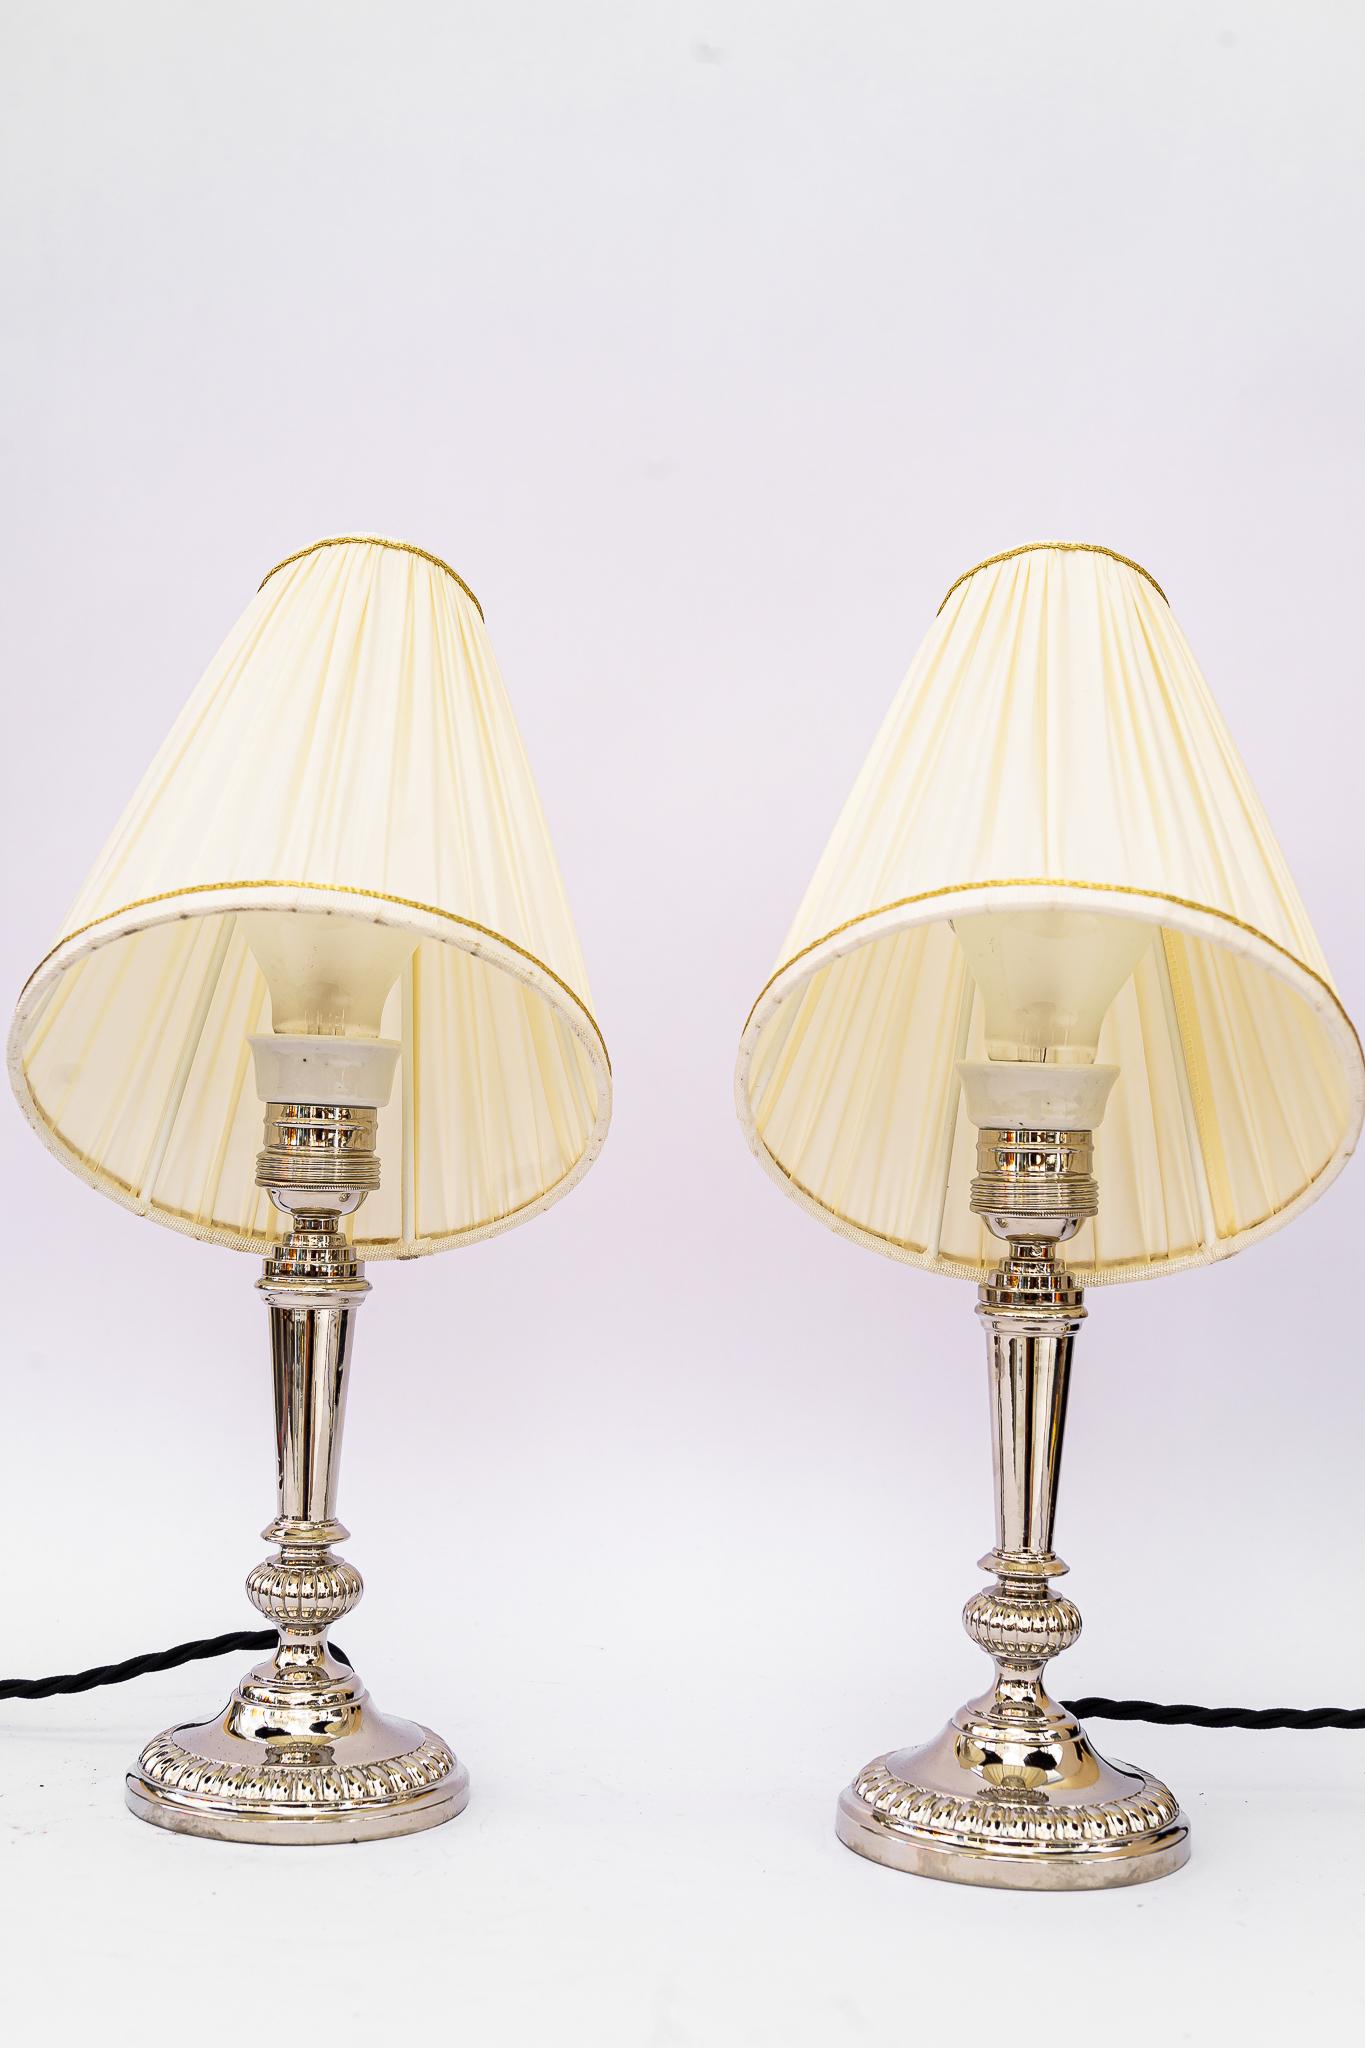 2 Art Deco Nickel, Plated Table Lamps with Fabric Shades, Vienna, Around 1920s In Good Condition For Sale In Wien, AT